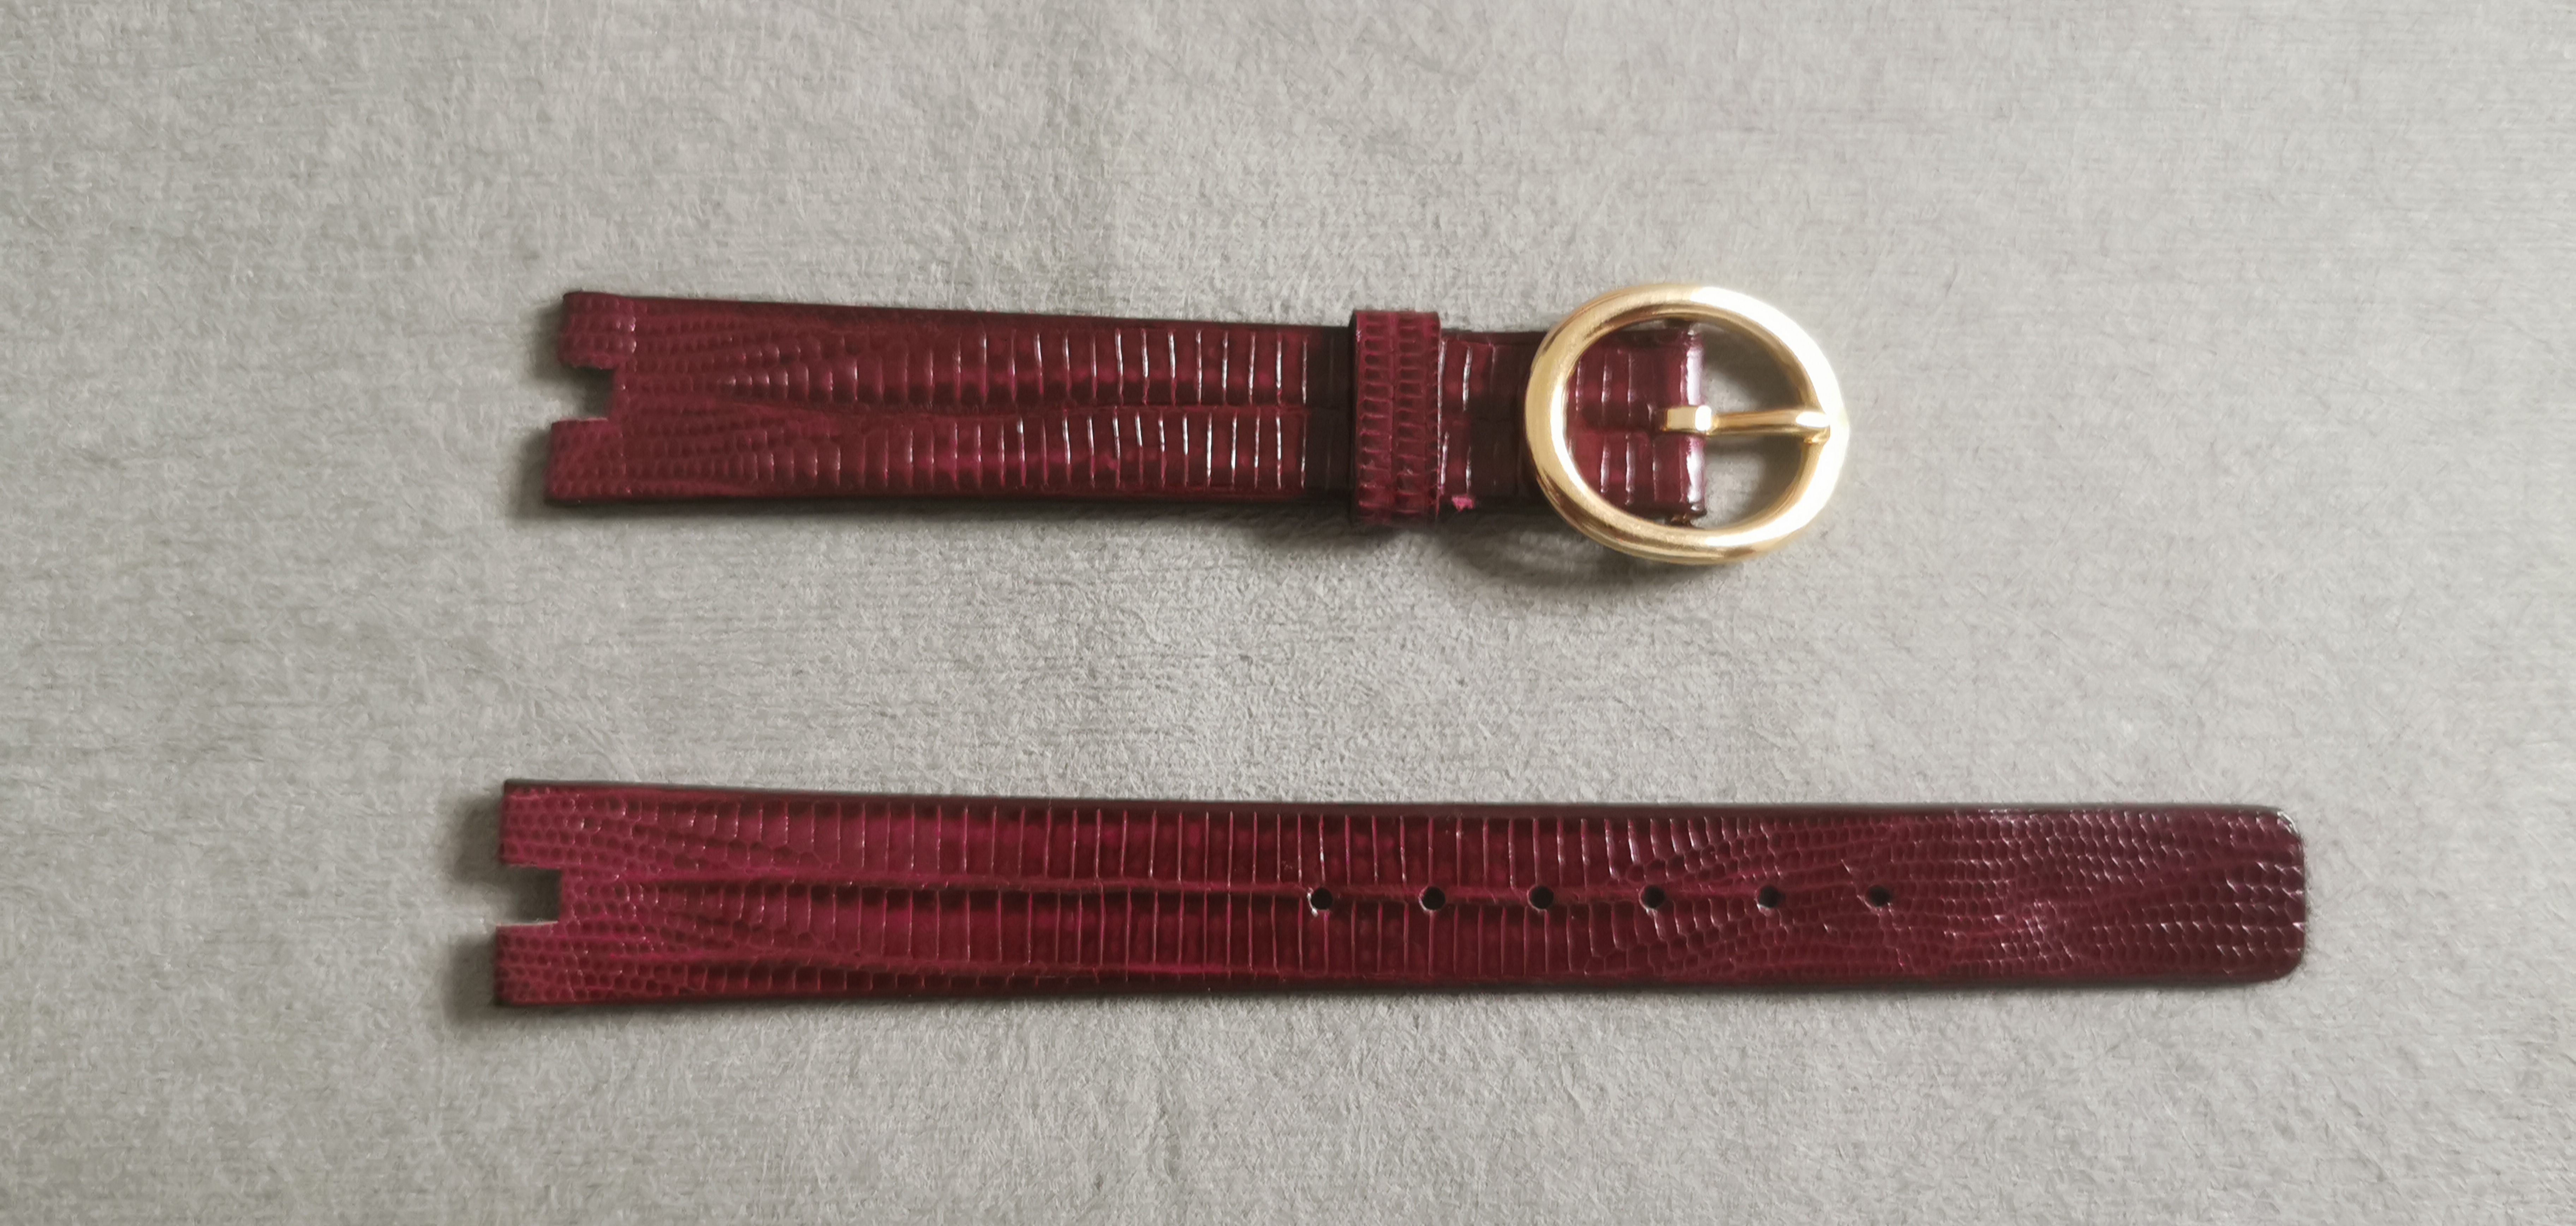 Paul Picot lizard leather burgundy strap mm 12/11 with gold plated buckle nos | San Giorgio a Cremano